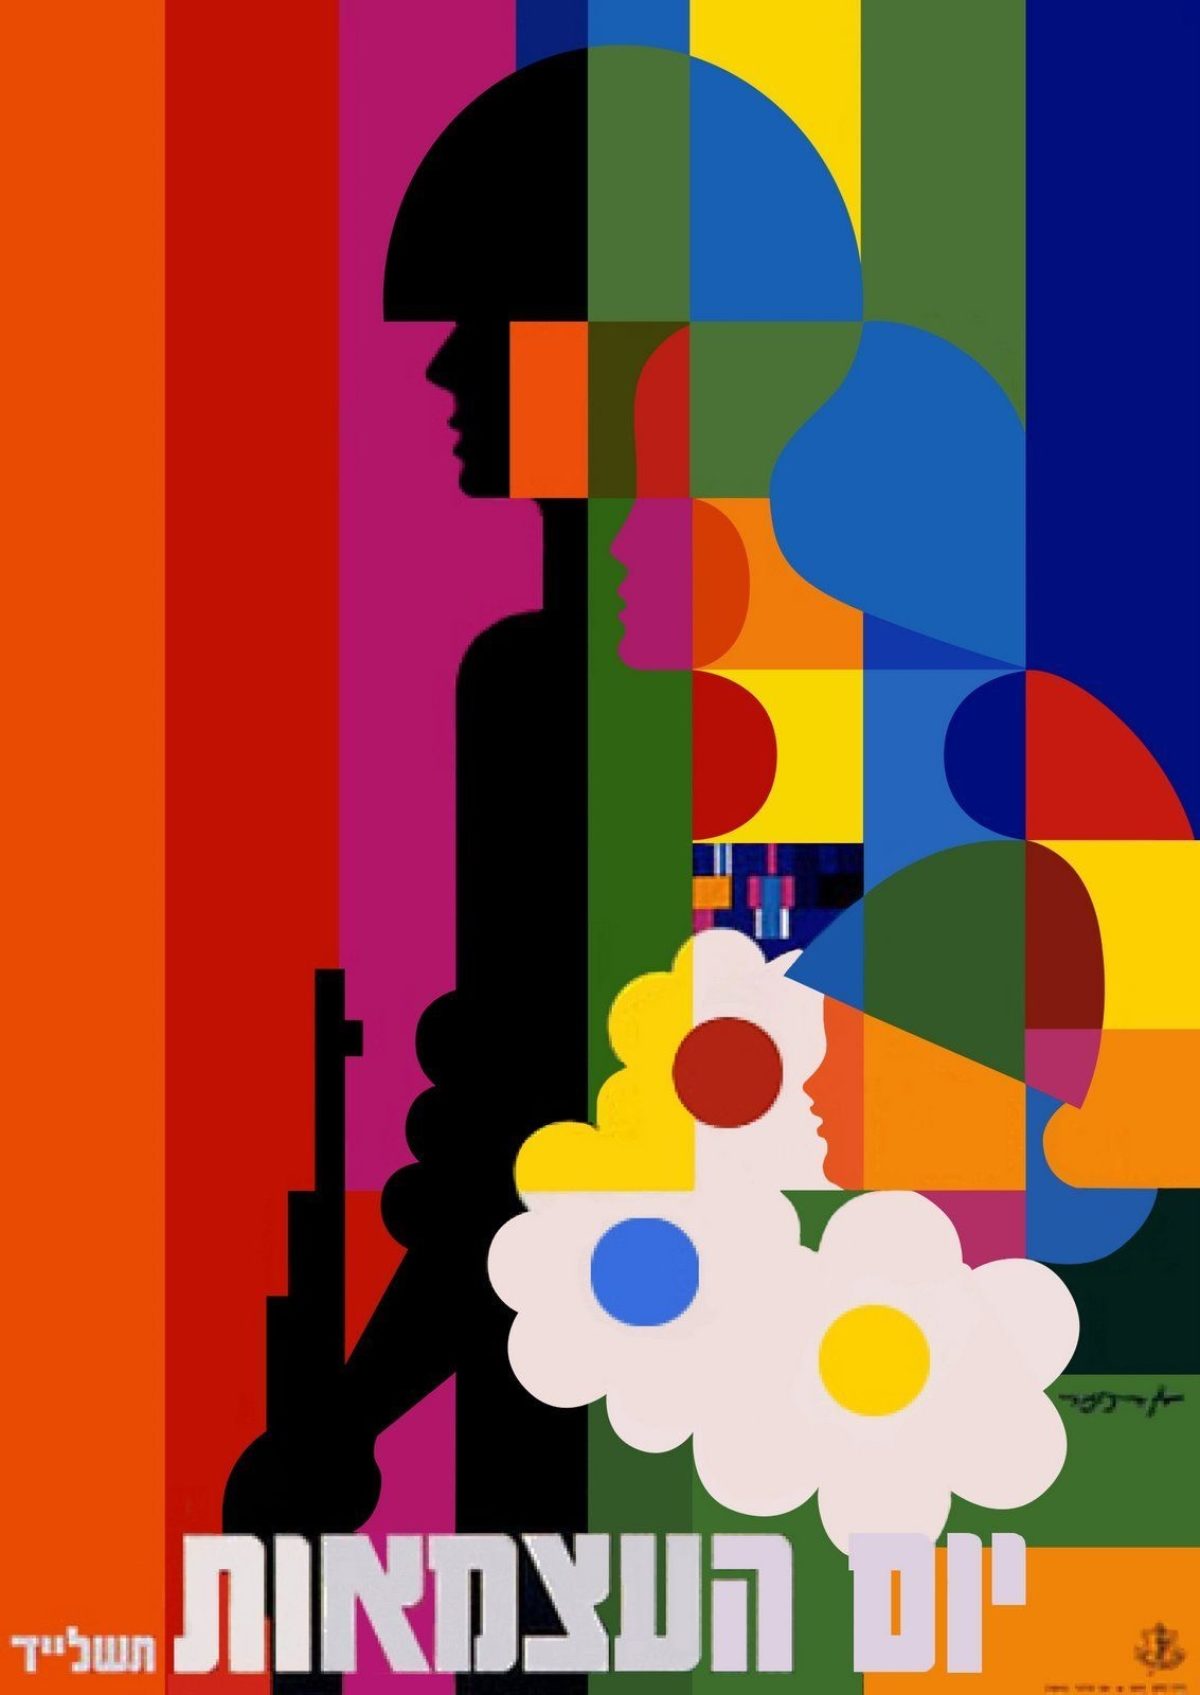 A rainbow poster with abstract overlays that shape into a soldier, a person, and a child holding flowers.